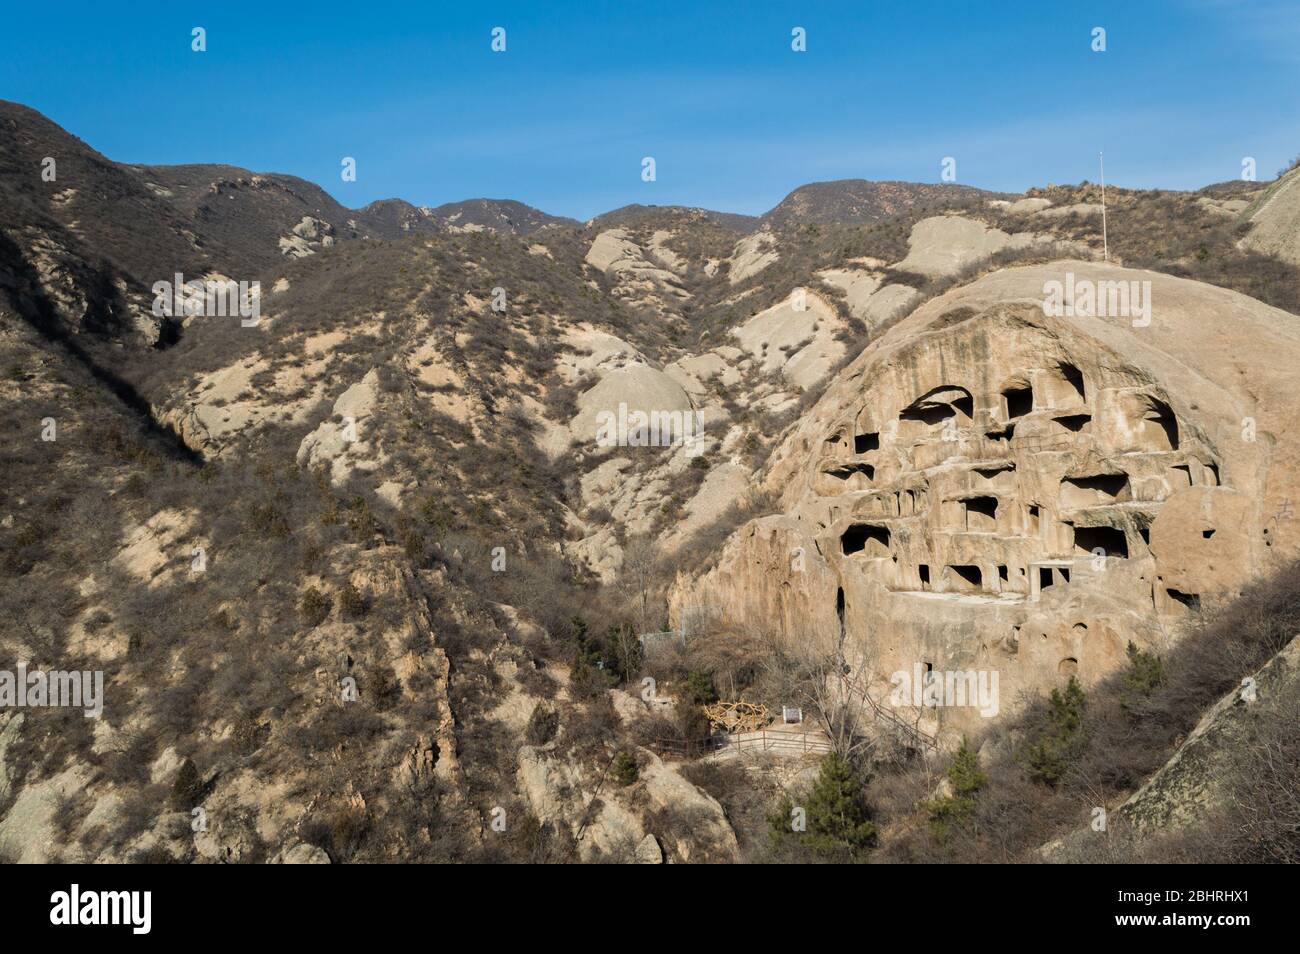 Ancient Cliff Dwellings of Guyaju Caves in Yanqing County, Hebei Province, about 80 kilometers northwest of Beijing, largest site of an ancient cave r Stock Photo